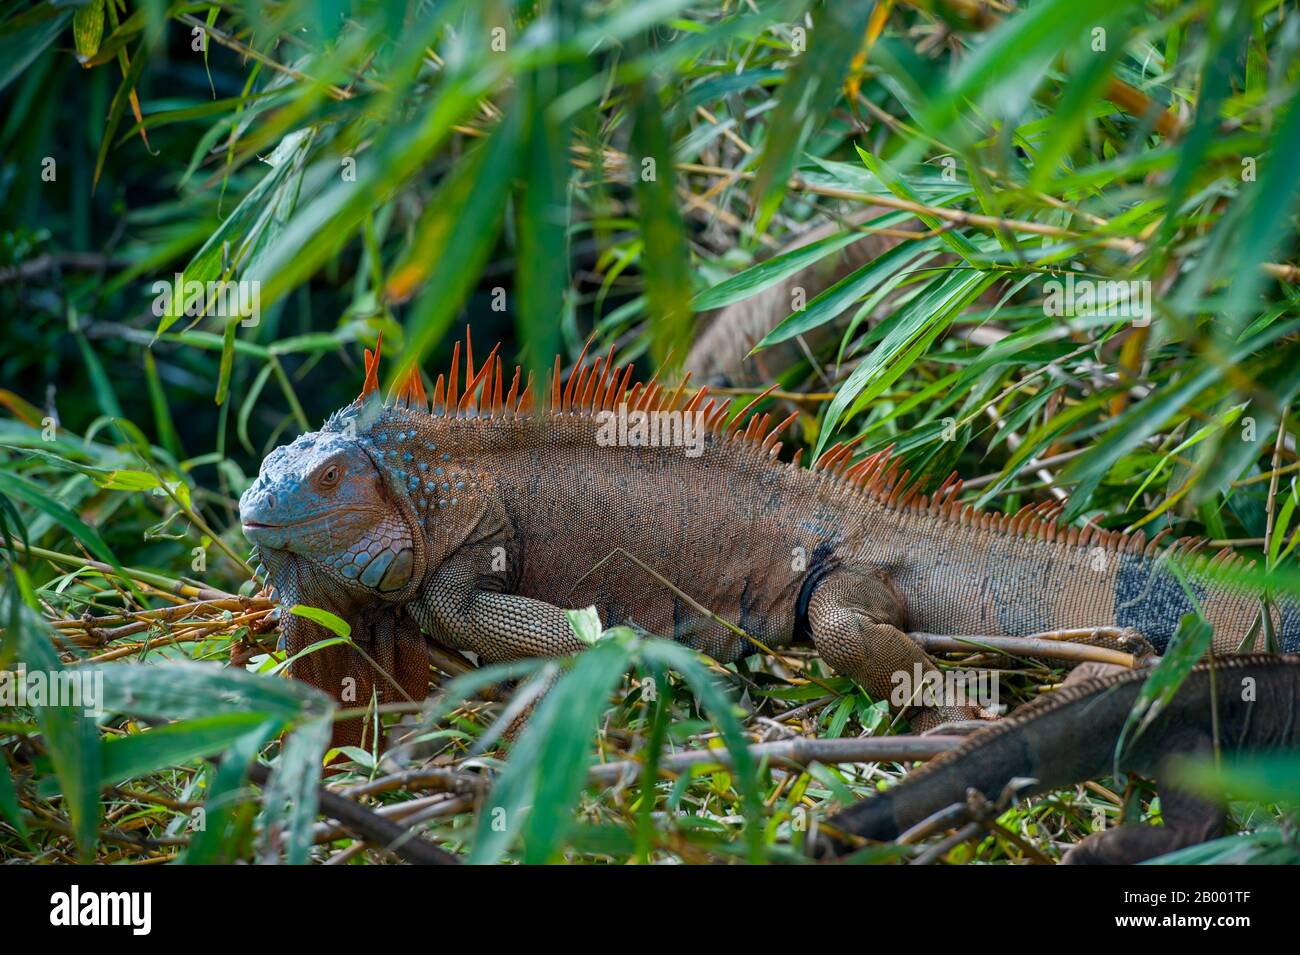 A male Green iguana (Iguana iguana) with colorful breeding colors in the rainforest near the Arenal Volcano in Costa Rica. Stock Photo